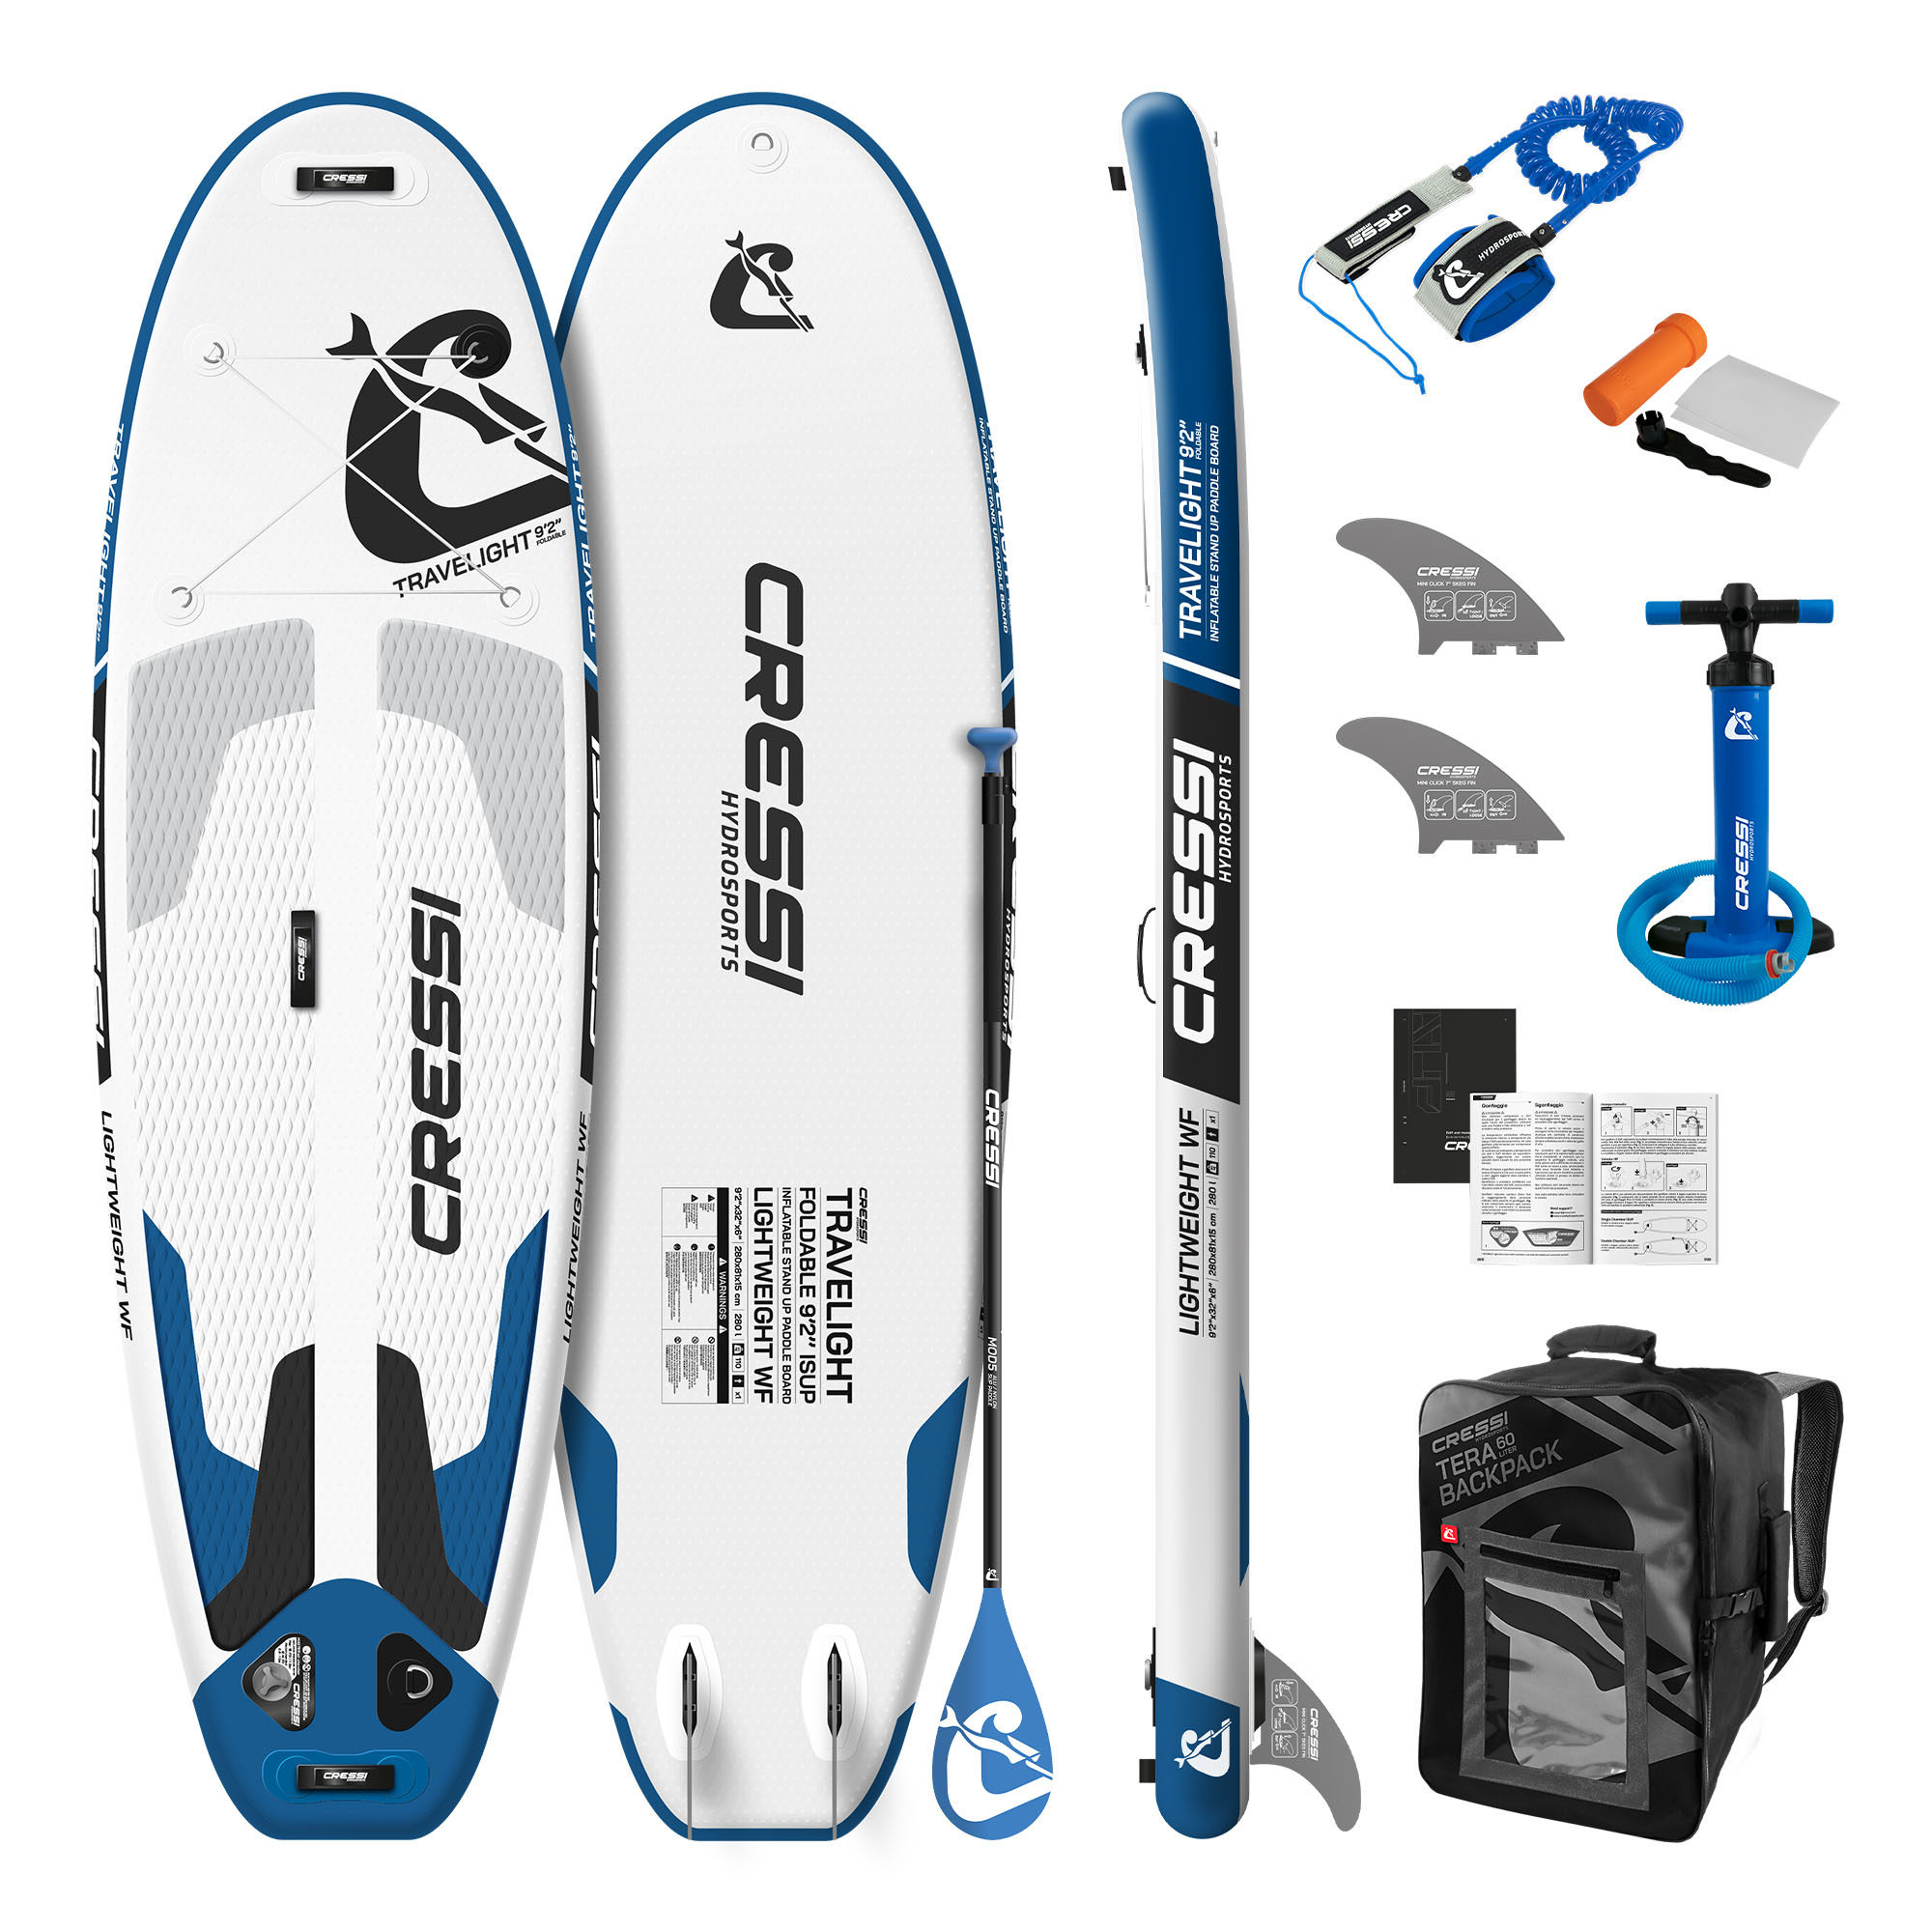 Tabla Paddle Board CRESSI Mod. Travelight ISUP 9'2'' Inflable Color Blanco/Azul Surfing